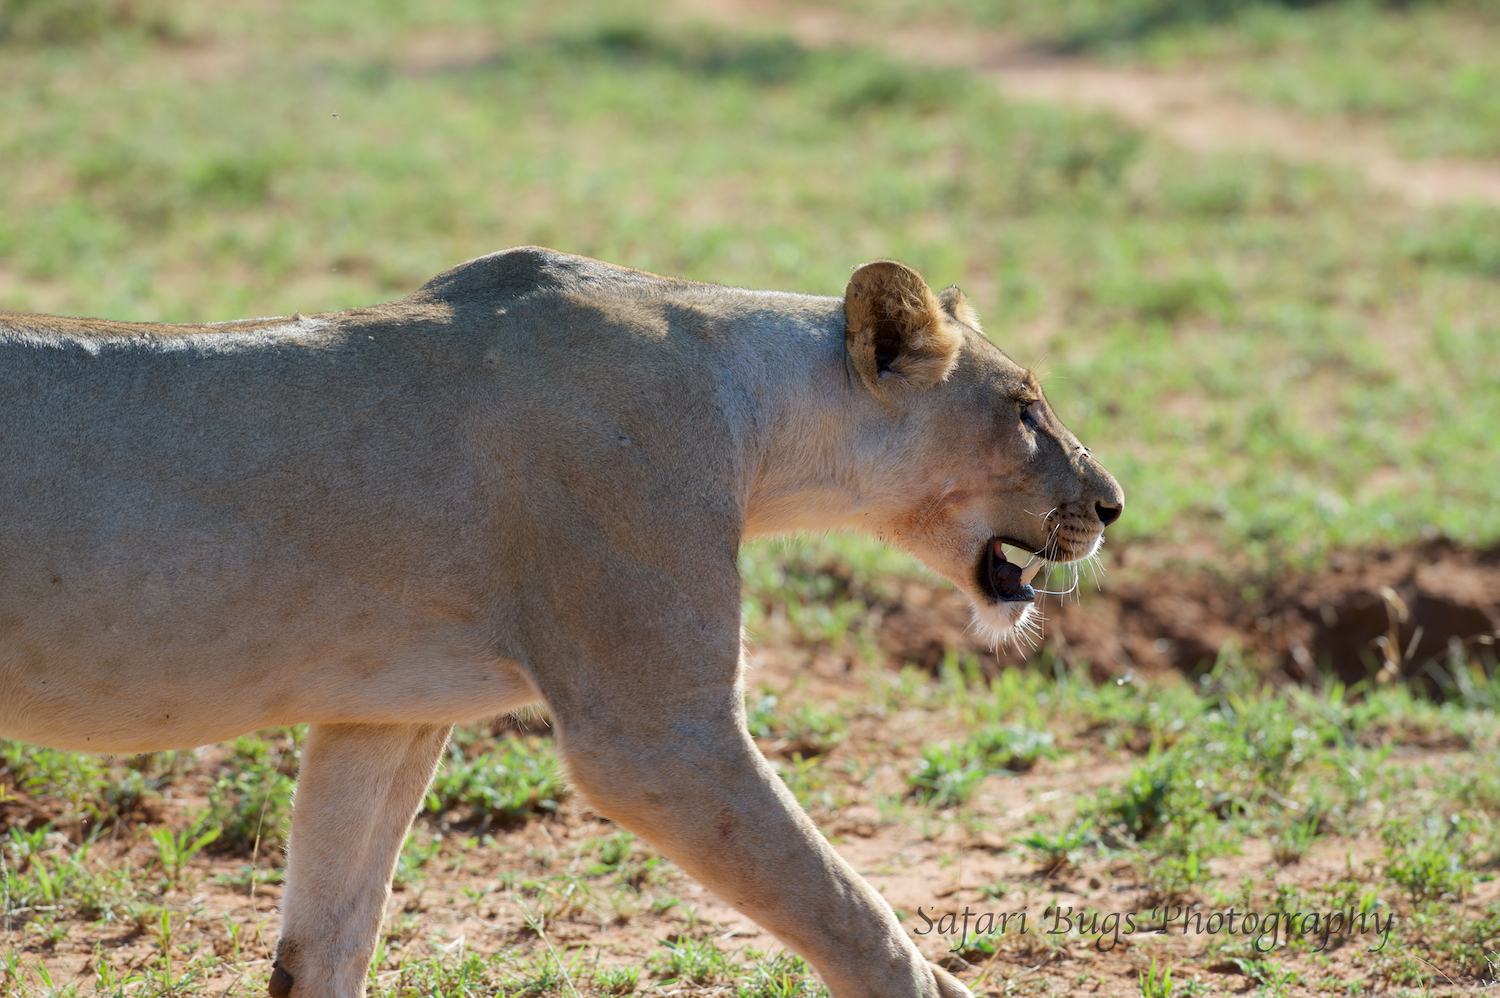  But the Jackal became distracted (or pretended to be) by some birds and ran off. &nbsp;And, the second lioness followed as did the one having breakfast. 